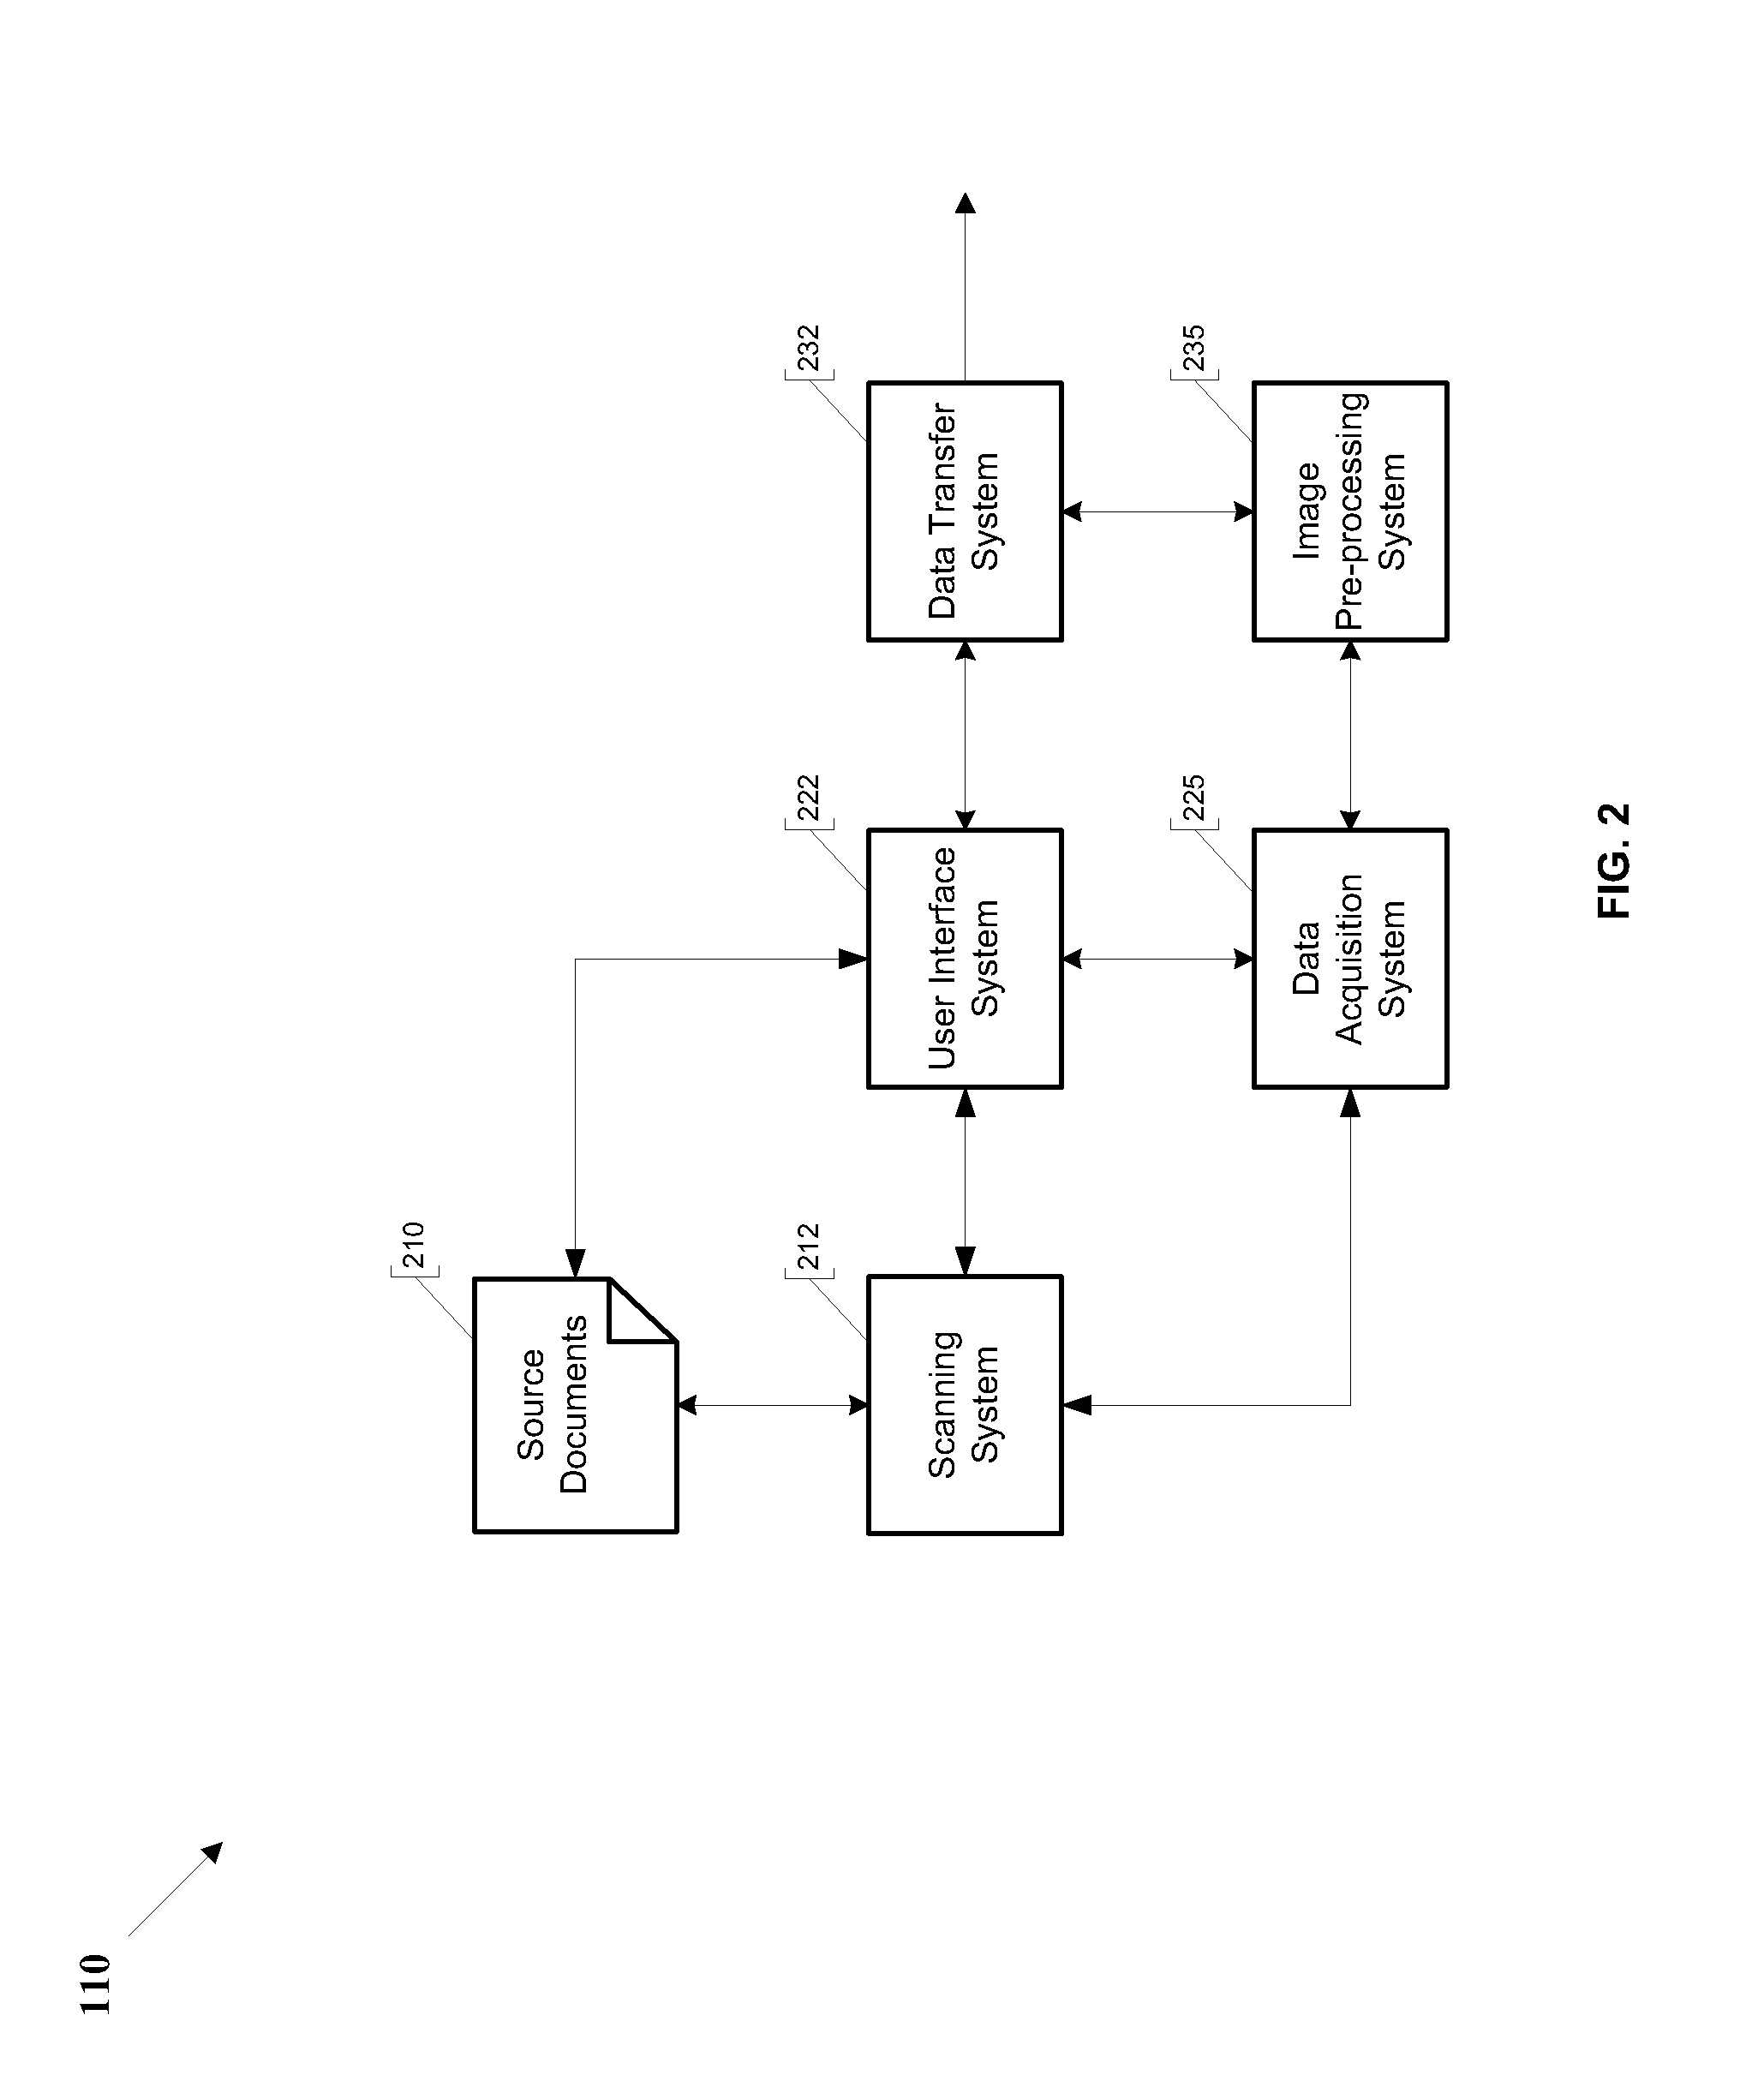 Systems and methods for training document analysis system for automatically extracting data from documents